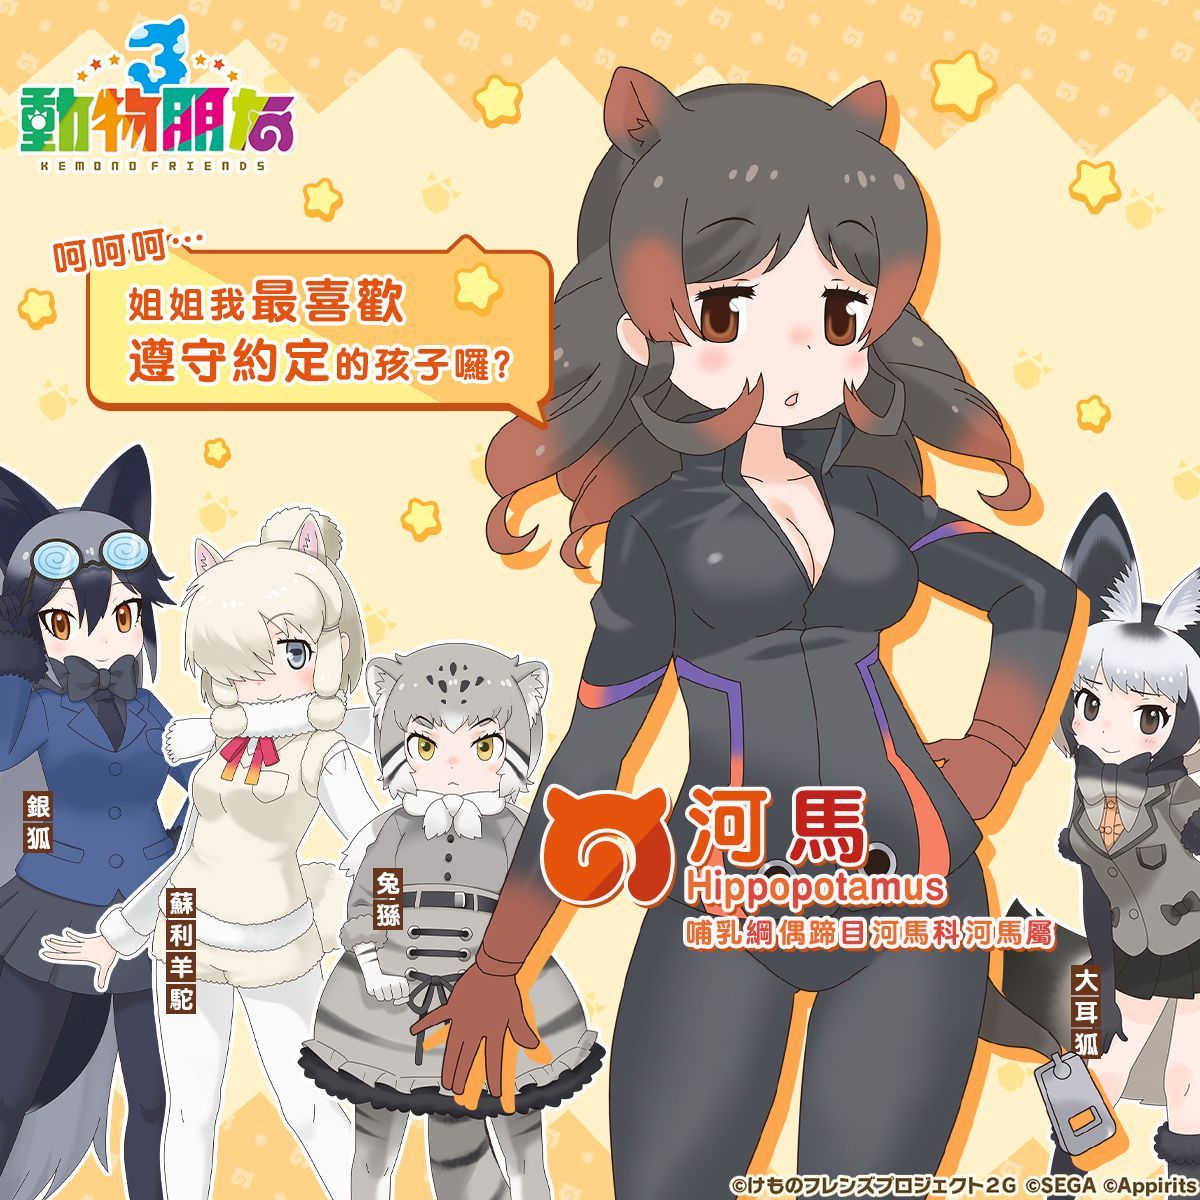 5girls alpaca_suri_(kemono_friends) animal_ears bat-eared_fox_(kemono_friends) belt black_hair blazer boots bow bowtie chinese_text copyright_name extra_ears glasses gloves grey_hair highres hippopotamus_(kemono_friends) jacket kemono_friends kemono_friends_3 long_hair looking_at_viewer multicolored_hair multiple_girls necktie official_art pallas's_cat_(kemono_friends) pants pantyhose red_hair shirt short_hair shorts silver_fox_(kemono_friends) simple_background skirt tail translation_request two-tone_hair vest